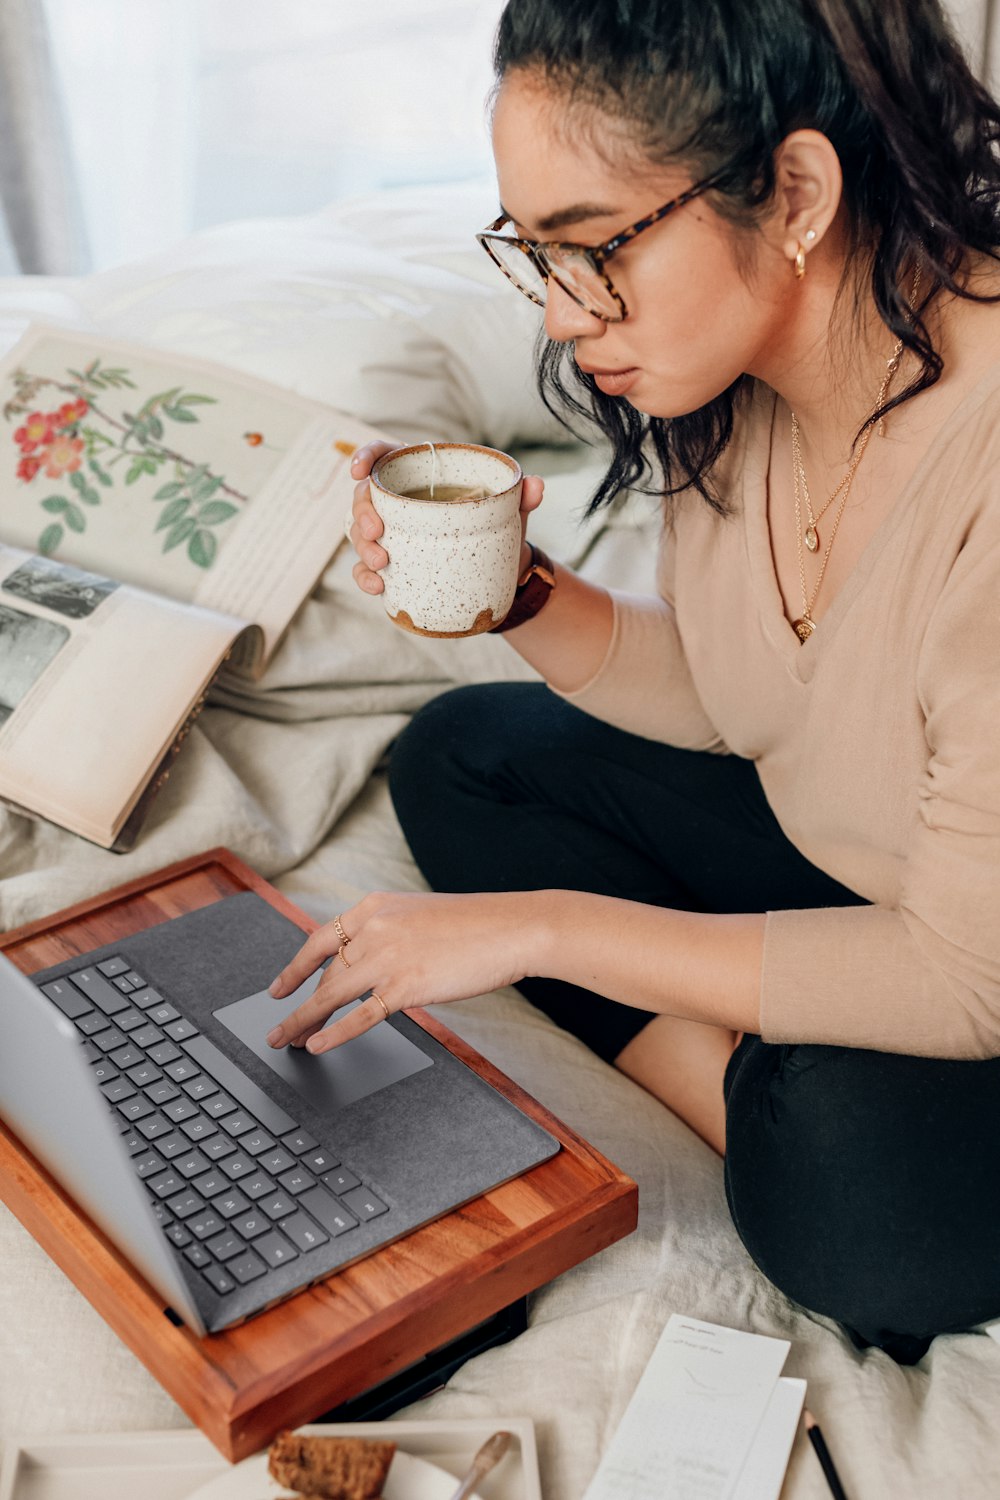 woman in beige long sleeve shirt and black pants sitting on bed using a Microsoft Surface Laptop 3 